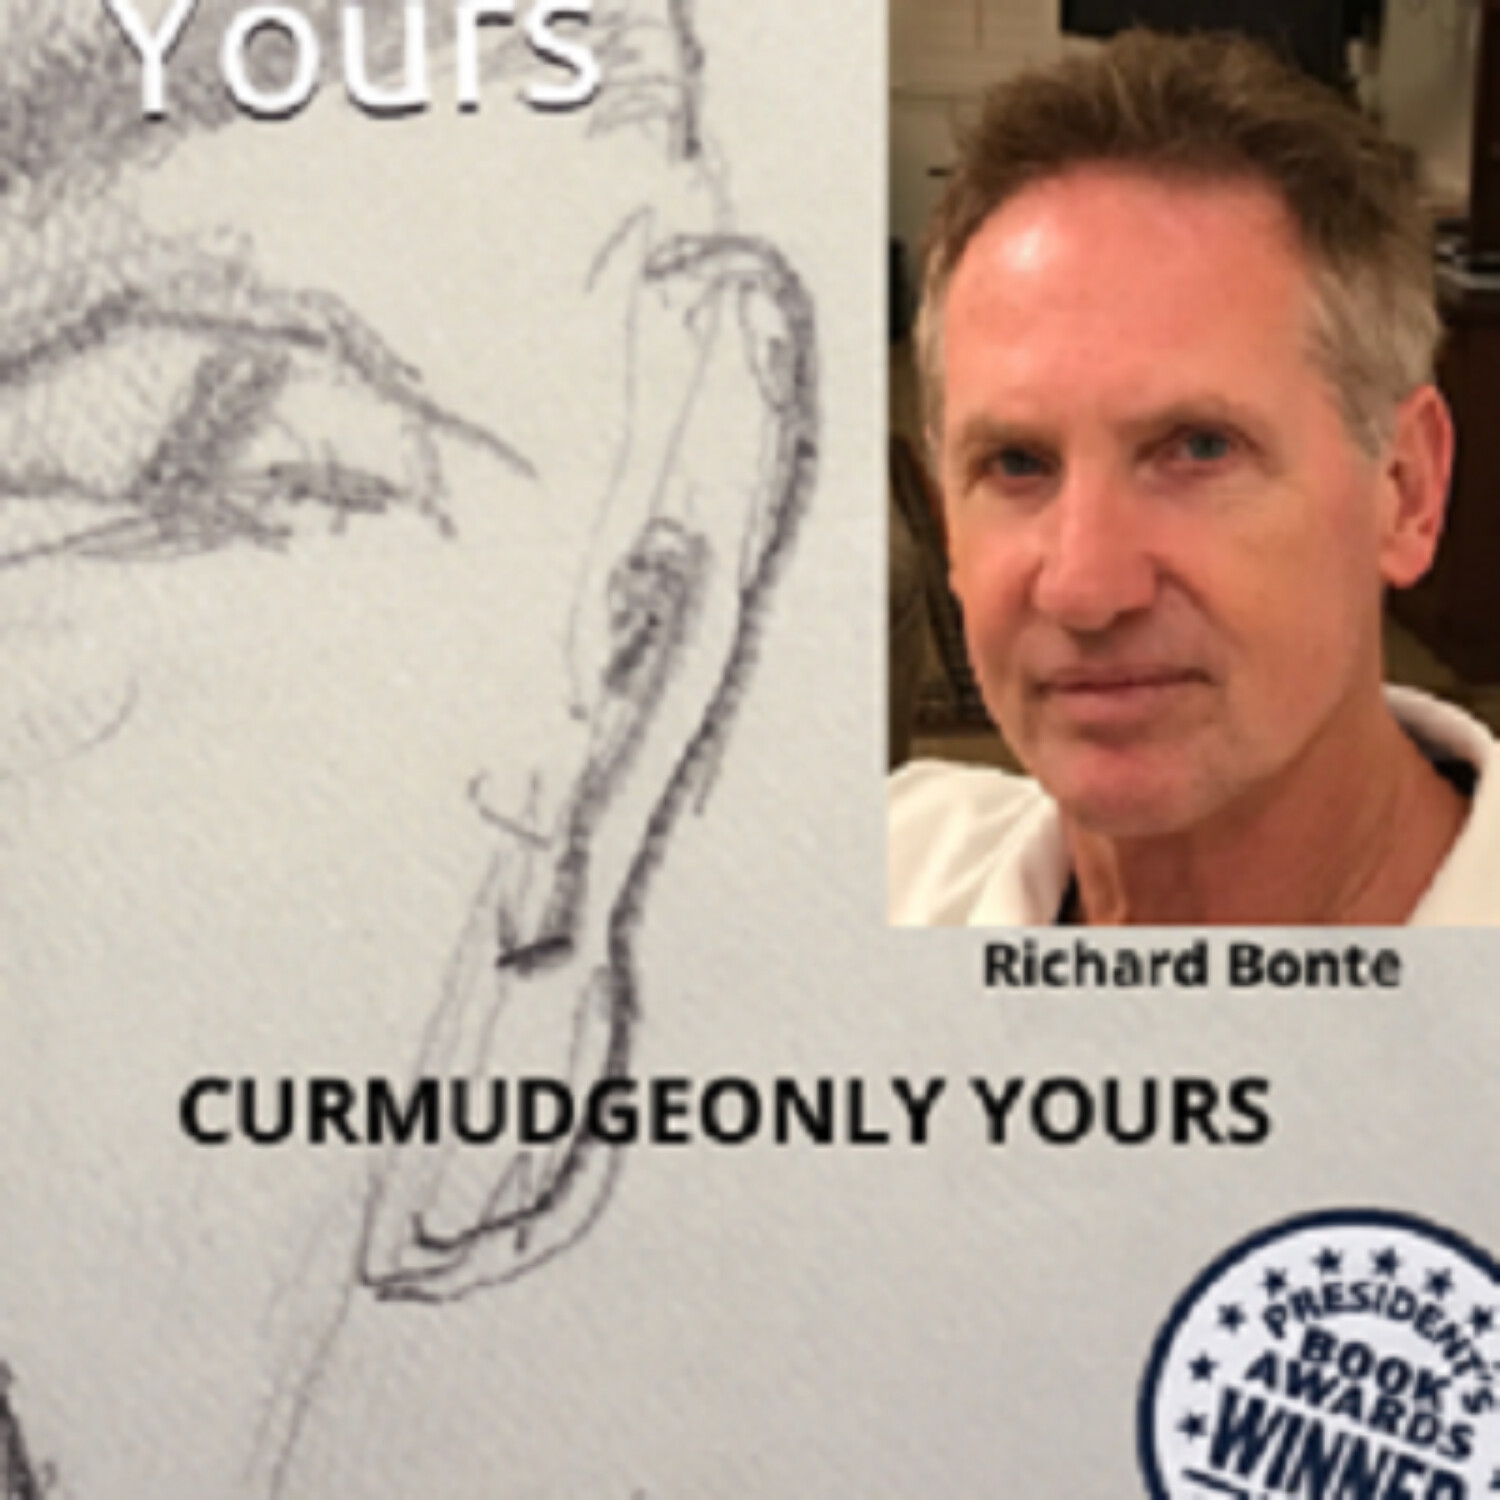 CURMUDGEONLY YOURS -- Richard Bonte